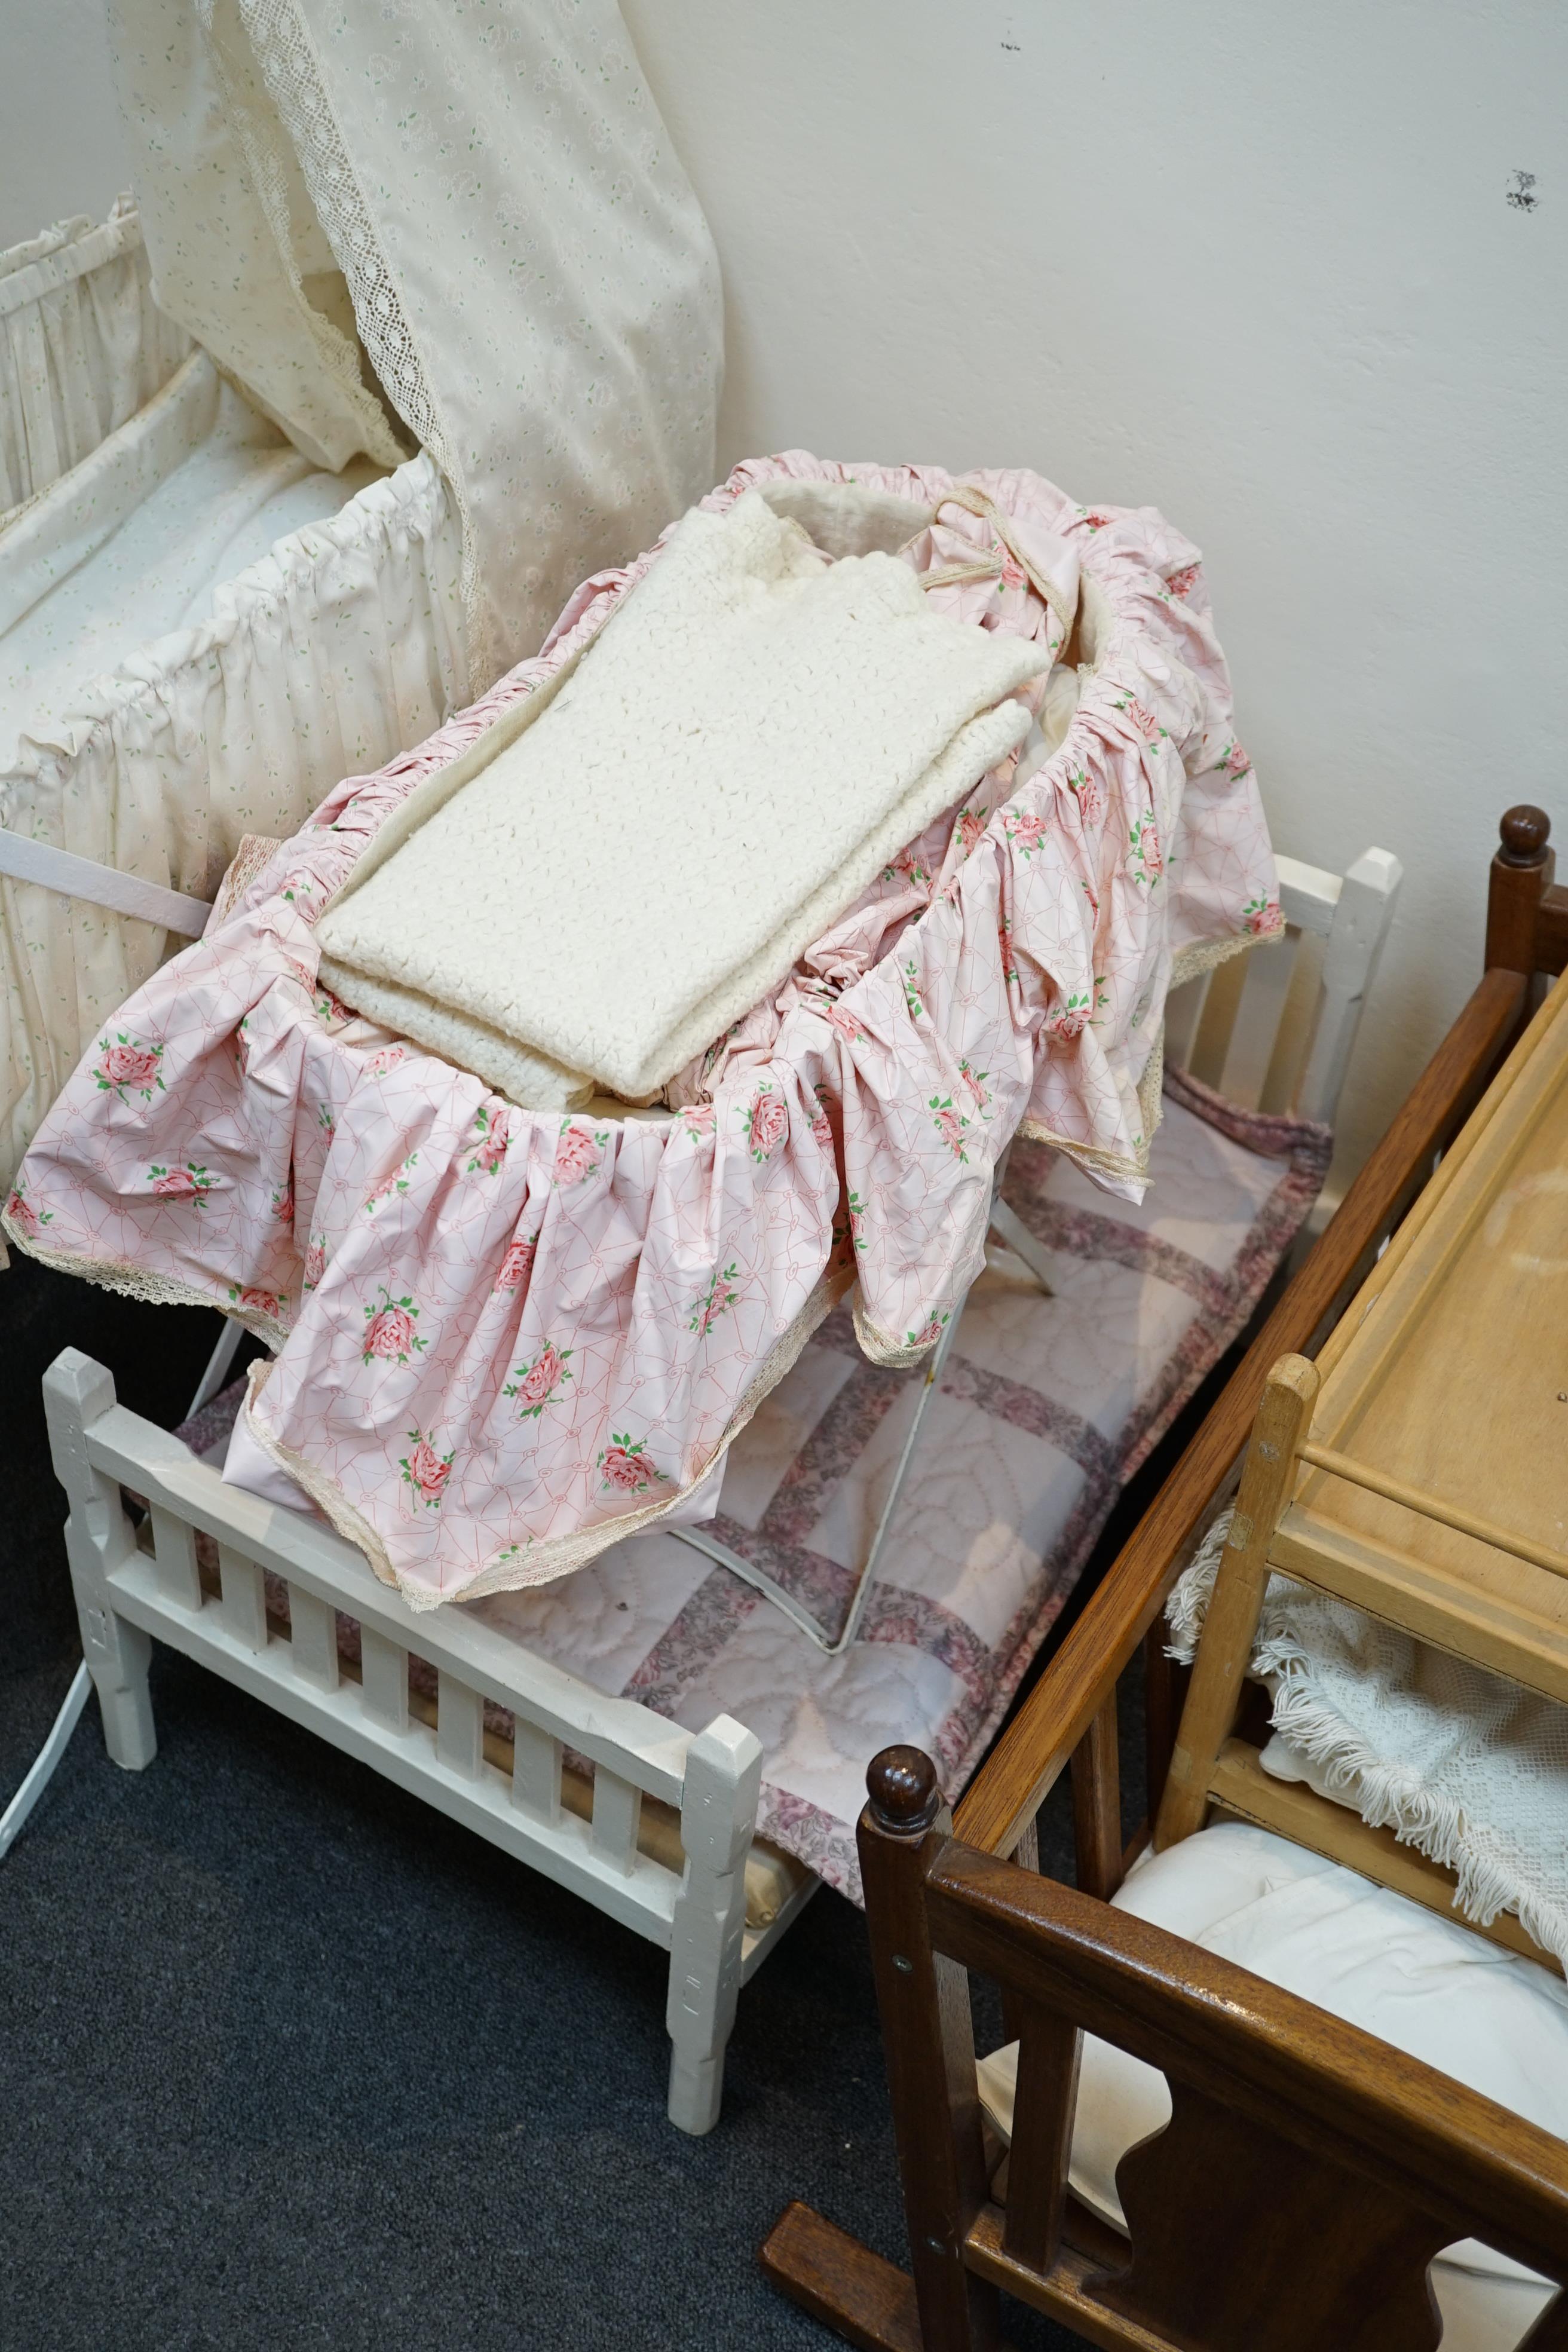 A collection of nine doll’s cribs of wood or wrought iron construction, together with two nineteenth century style doll’s ’bath chairs’, a toy mangle, Disney themed Snow White carpet sweeper and a boxed child’s sewing ma